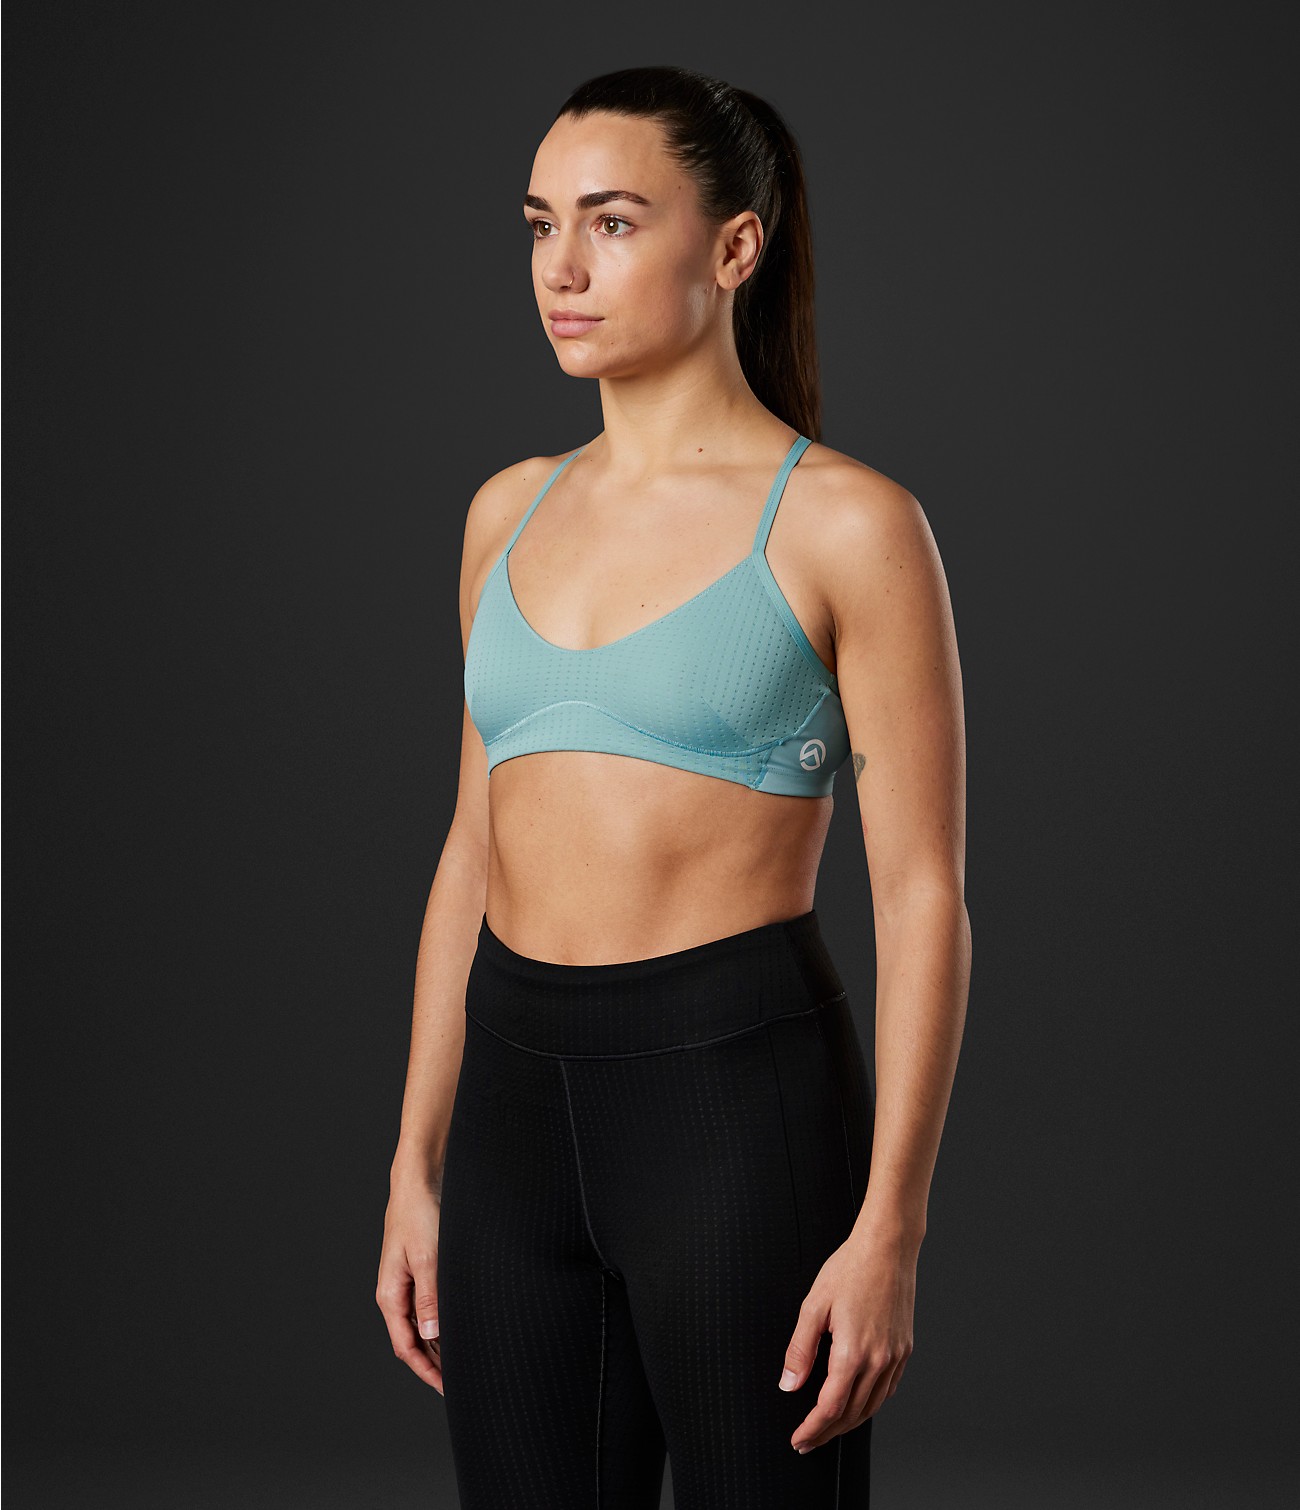 Women’s Summit Series Pro 120 Bralette | The North Face